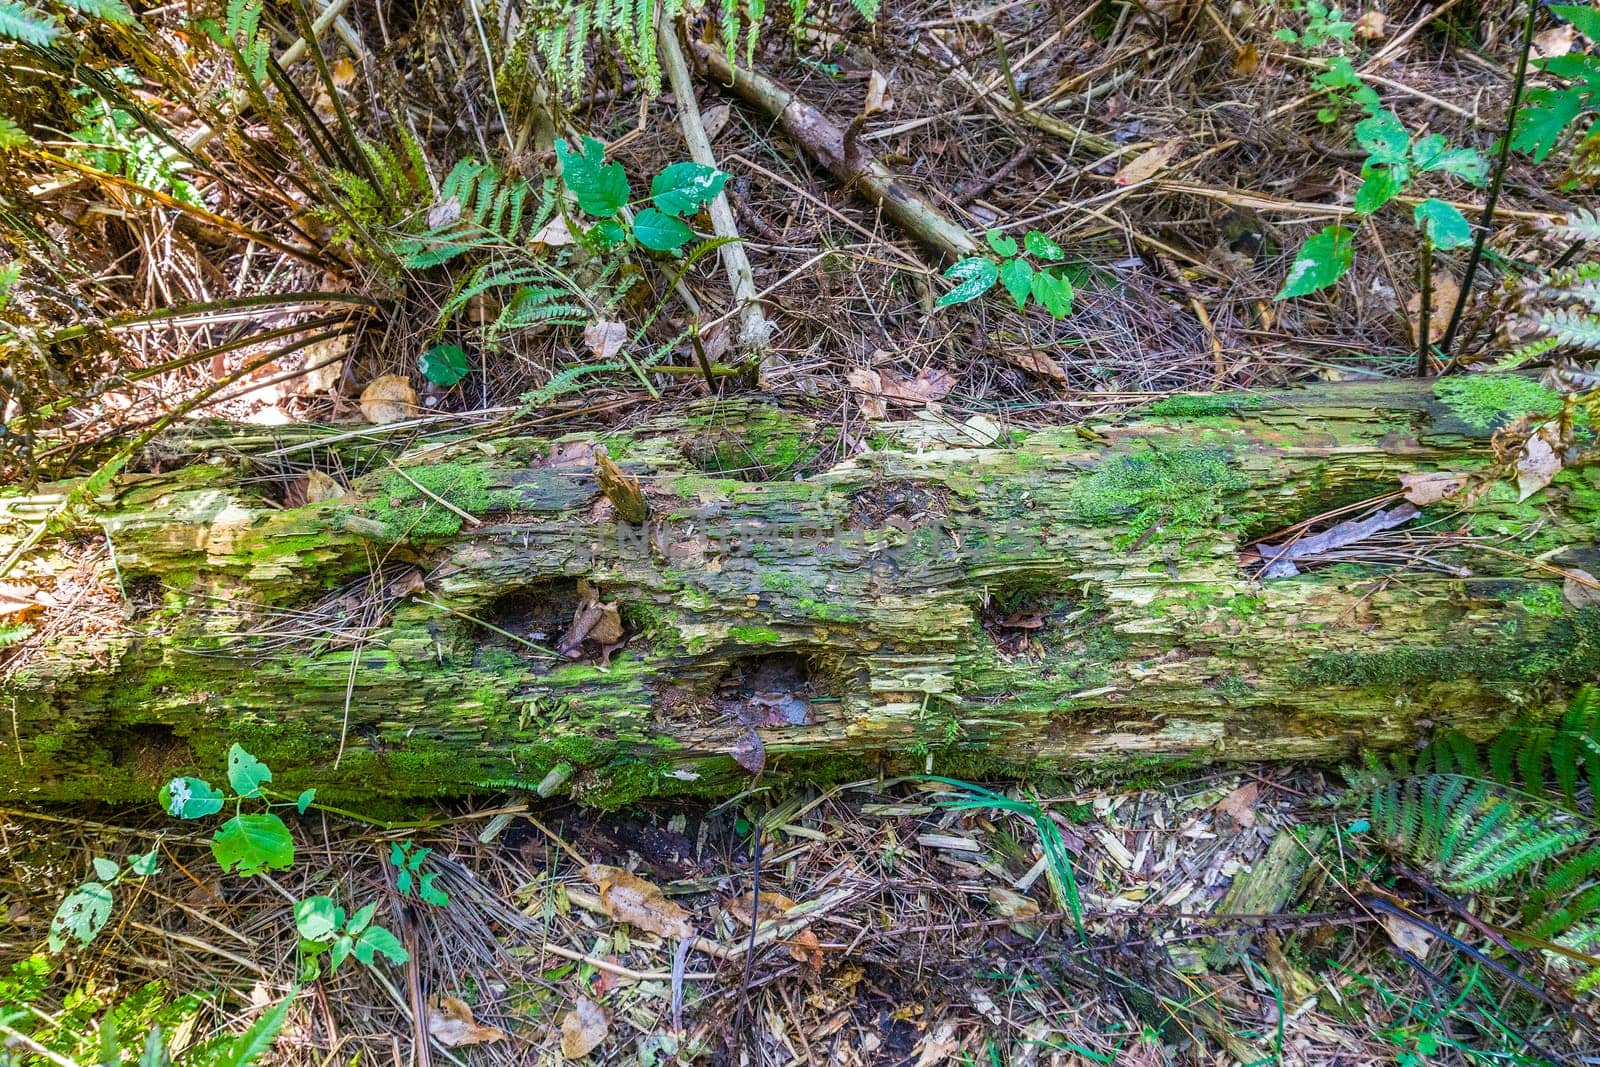 Decayed tree trunk eaten by beetles and eaten by bark beetles